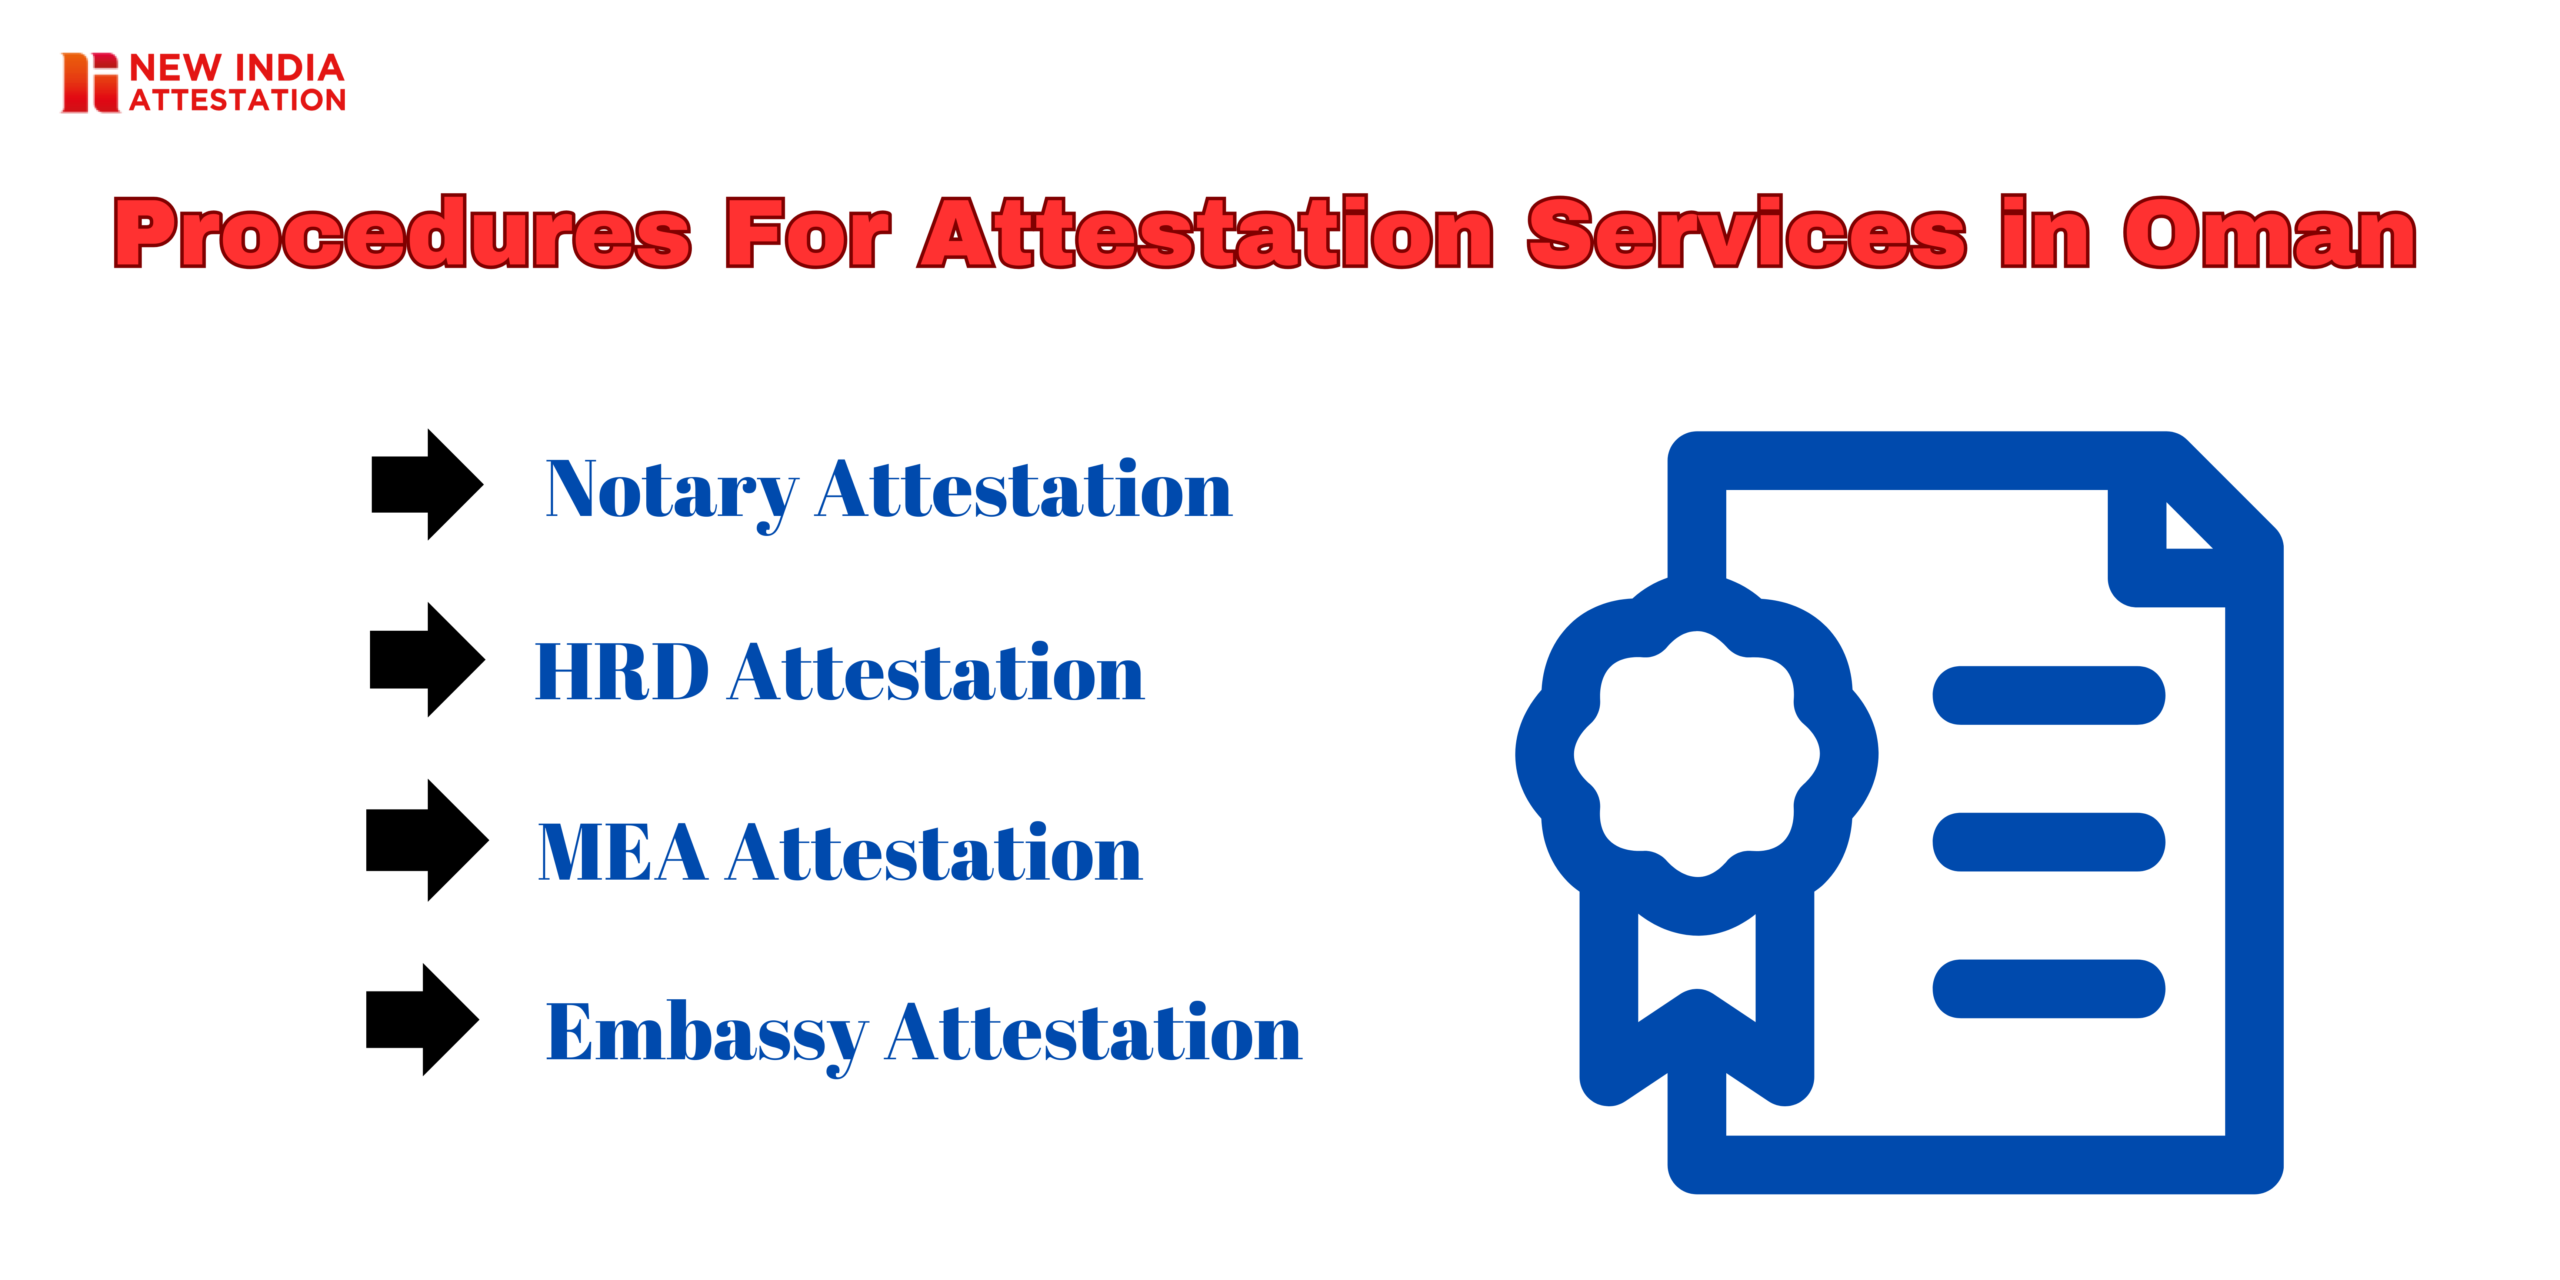 Procedures For Attestation Services in Oman